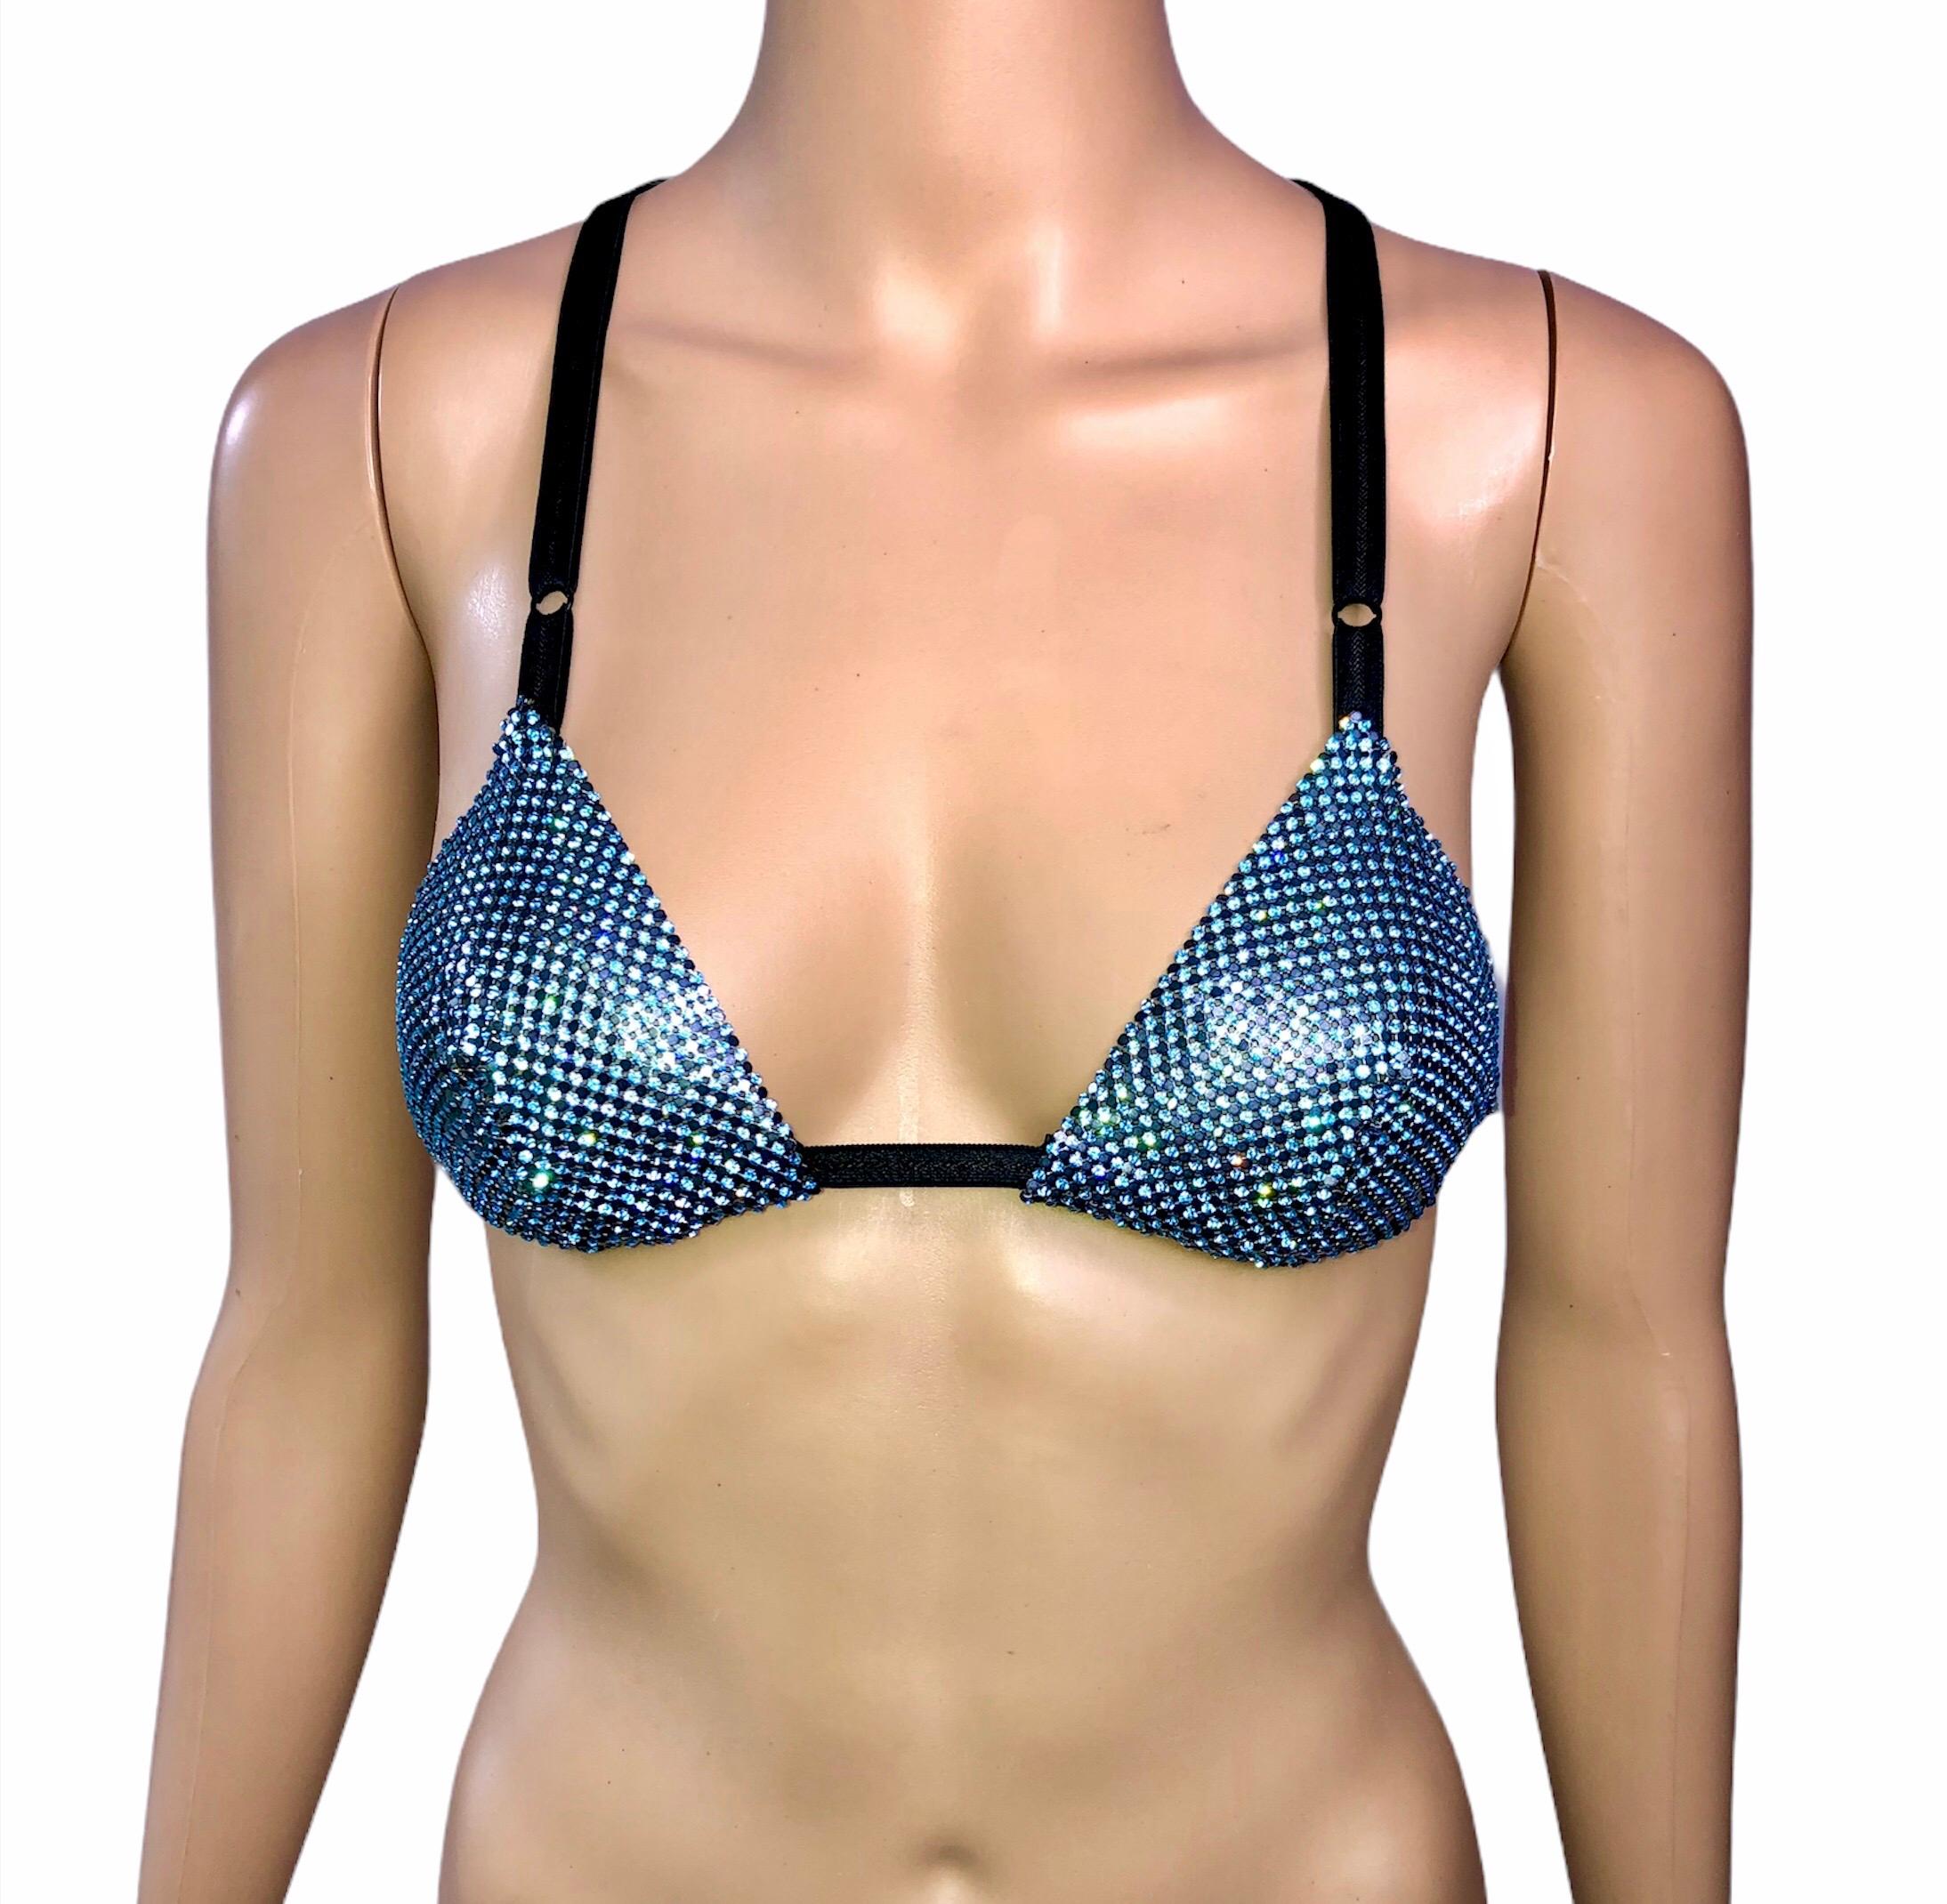 Dolce & Gabbana S/S 2000 Runway Crystal Metal Mesh Blue Bralette Bra Top Size IT 40

Excellent Condition
